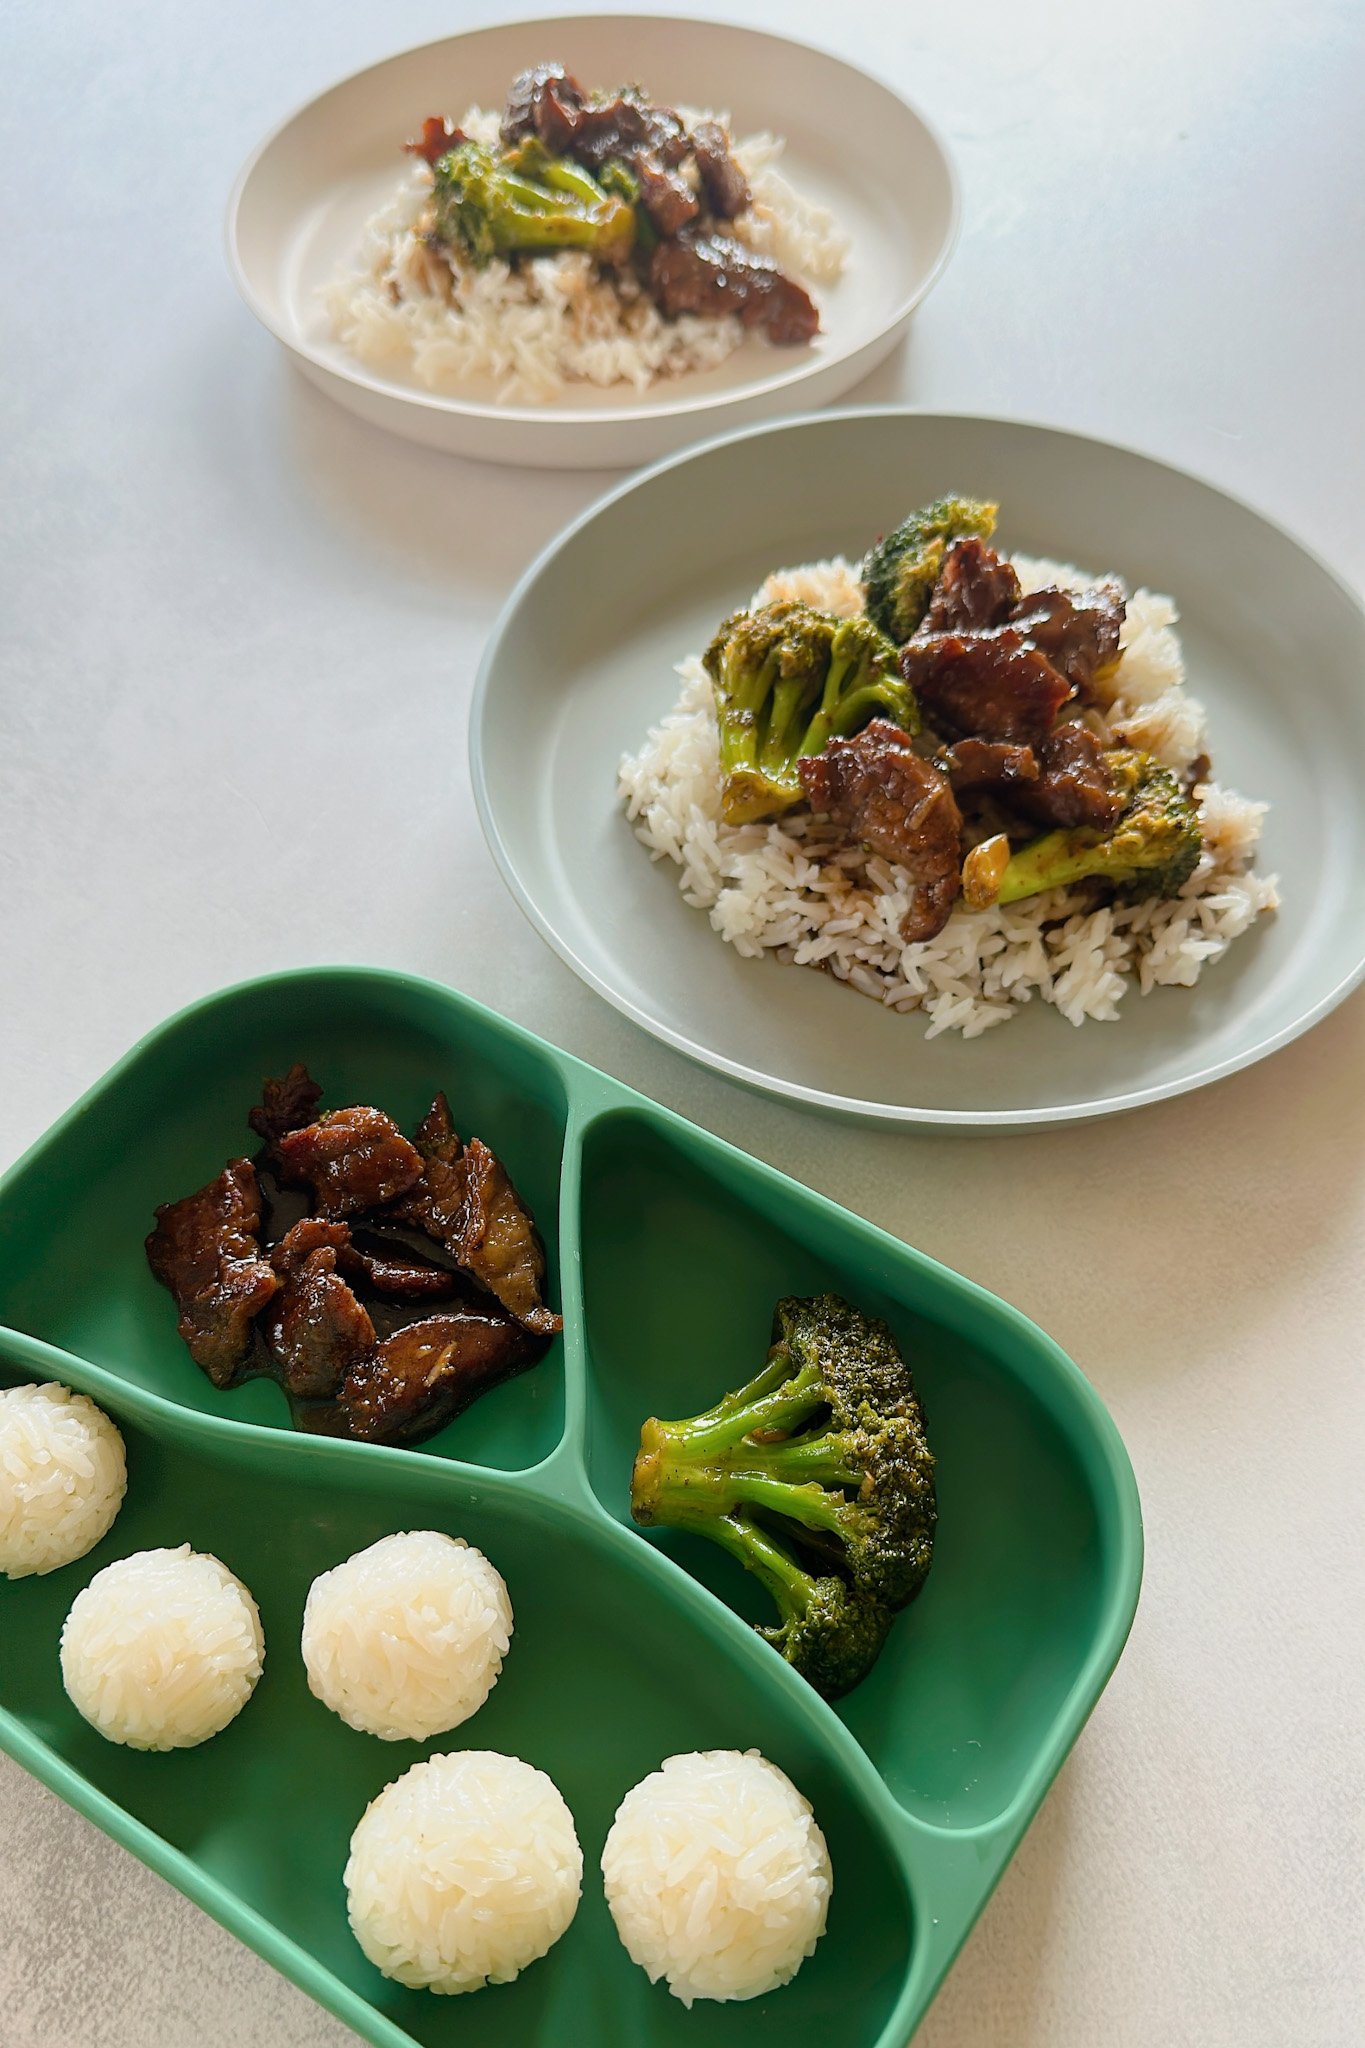 Beef and broccoli stir fry servings for a baby and two toddlers.